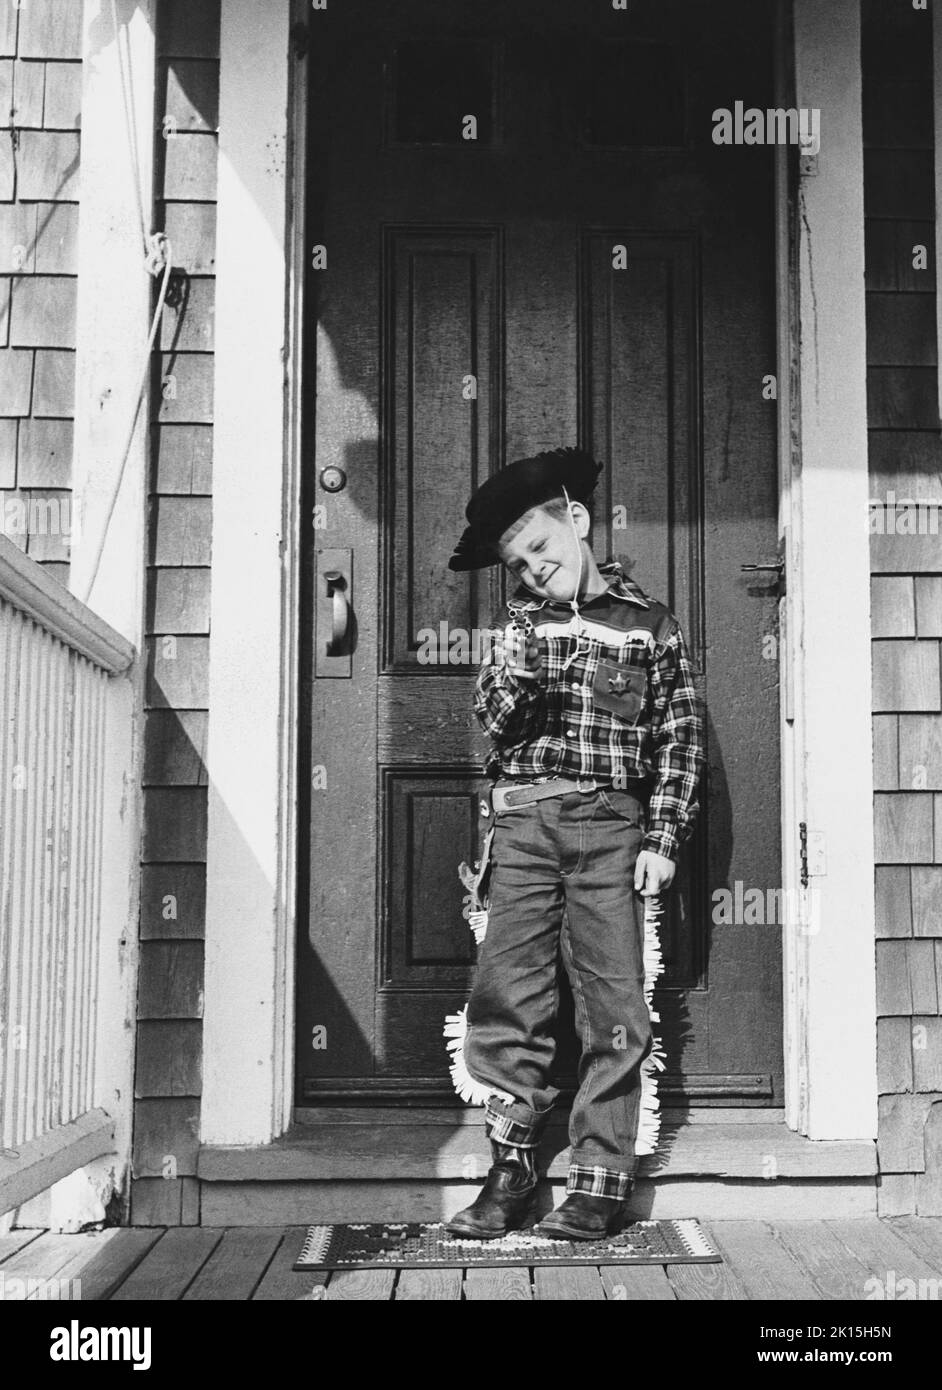 Six year old, Lewis E. Raymond, III, dressed as a cowboy brandishes his toy gun on the porch of his home. Many children participate in a form of role-playing known as make believe, wherein they adopt certain roles such as doctor and act out those roles in character. Sometimes make believe adopts an oppositional nature, resulting in games such as cops and robbers. Circa 1950-60s. Stock Photo